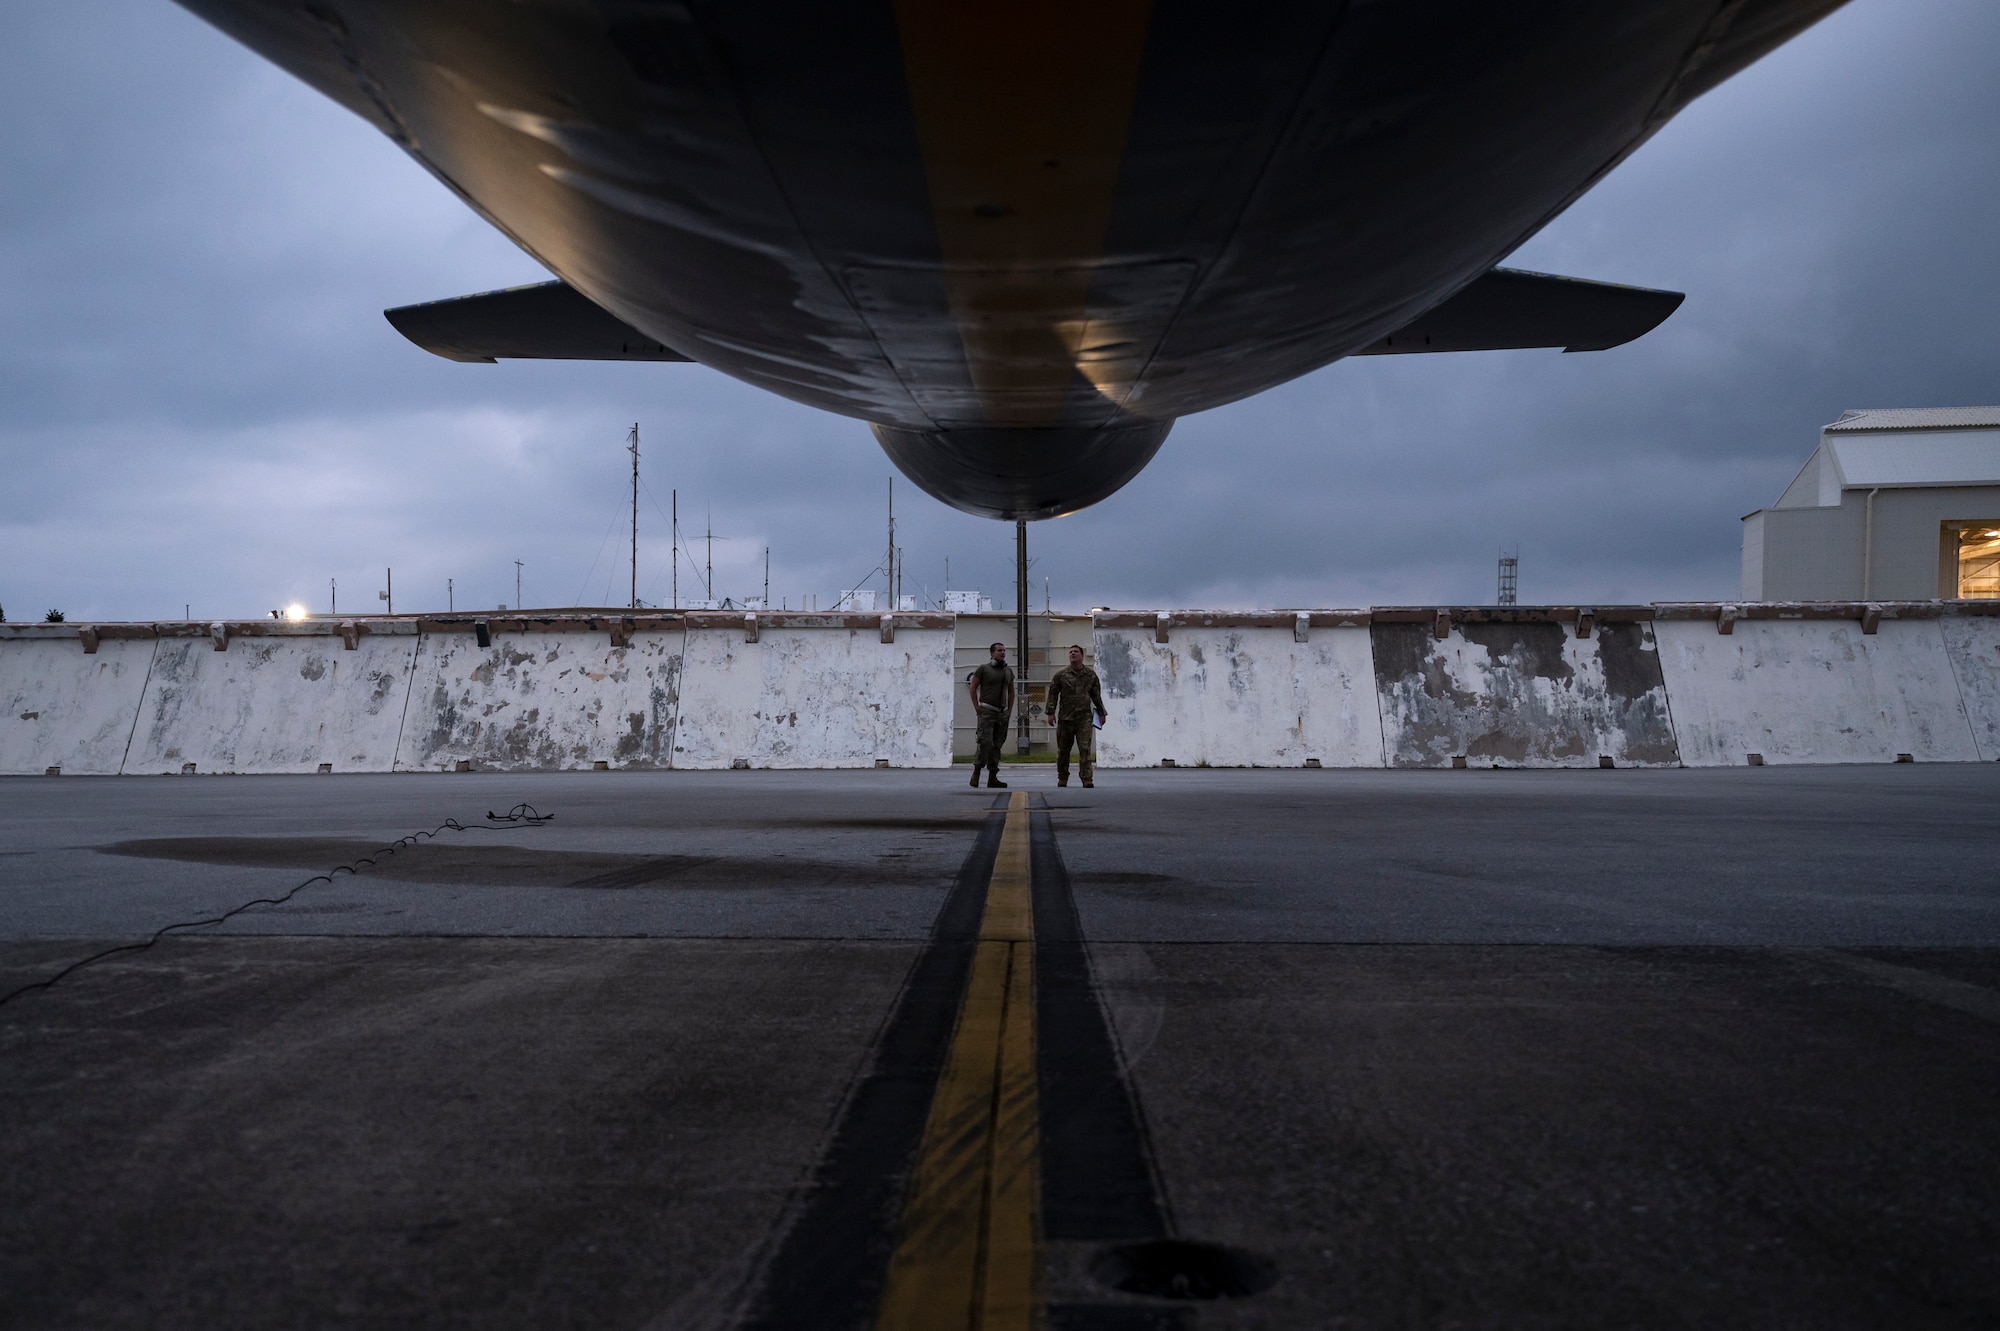 U.S. Air Force personnel assigned to the 909th Air Refueling Squadron and the 718th Aircraft Maintenance Squadron conduct pre-flight checks prior to a refueling flight at Kadena Air Base, Japan, Nov. 4, 2022. The 909th ARS is the premiere force for aerial refueling operations in the Indo-Pacific theater, supporting U.S. forces and regional allies and partners. (U.S. Air Force photo by Senior Airman Jessi Roth)